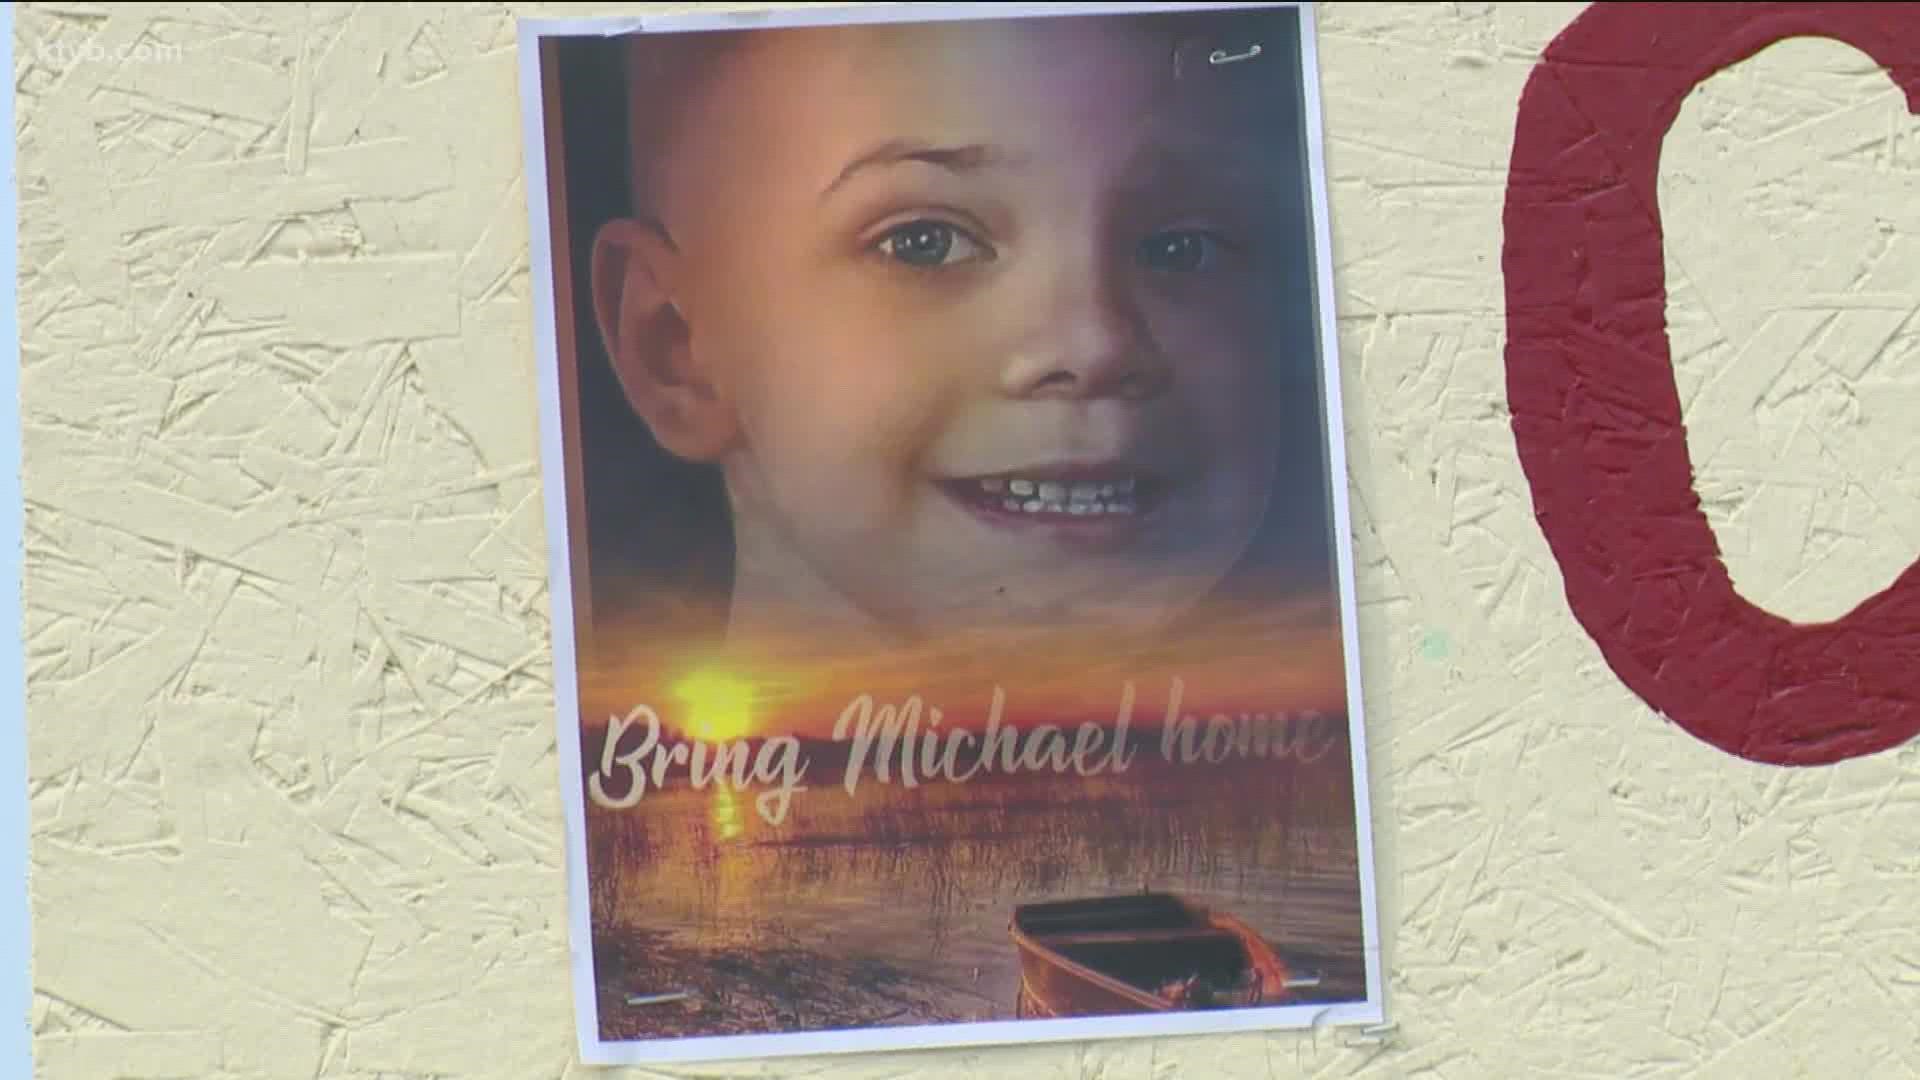 The National Center for Missing and Exploited Children Fruitland since five-year-old Michael Vaughan went missing on July 27.